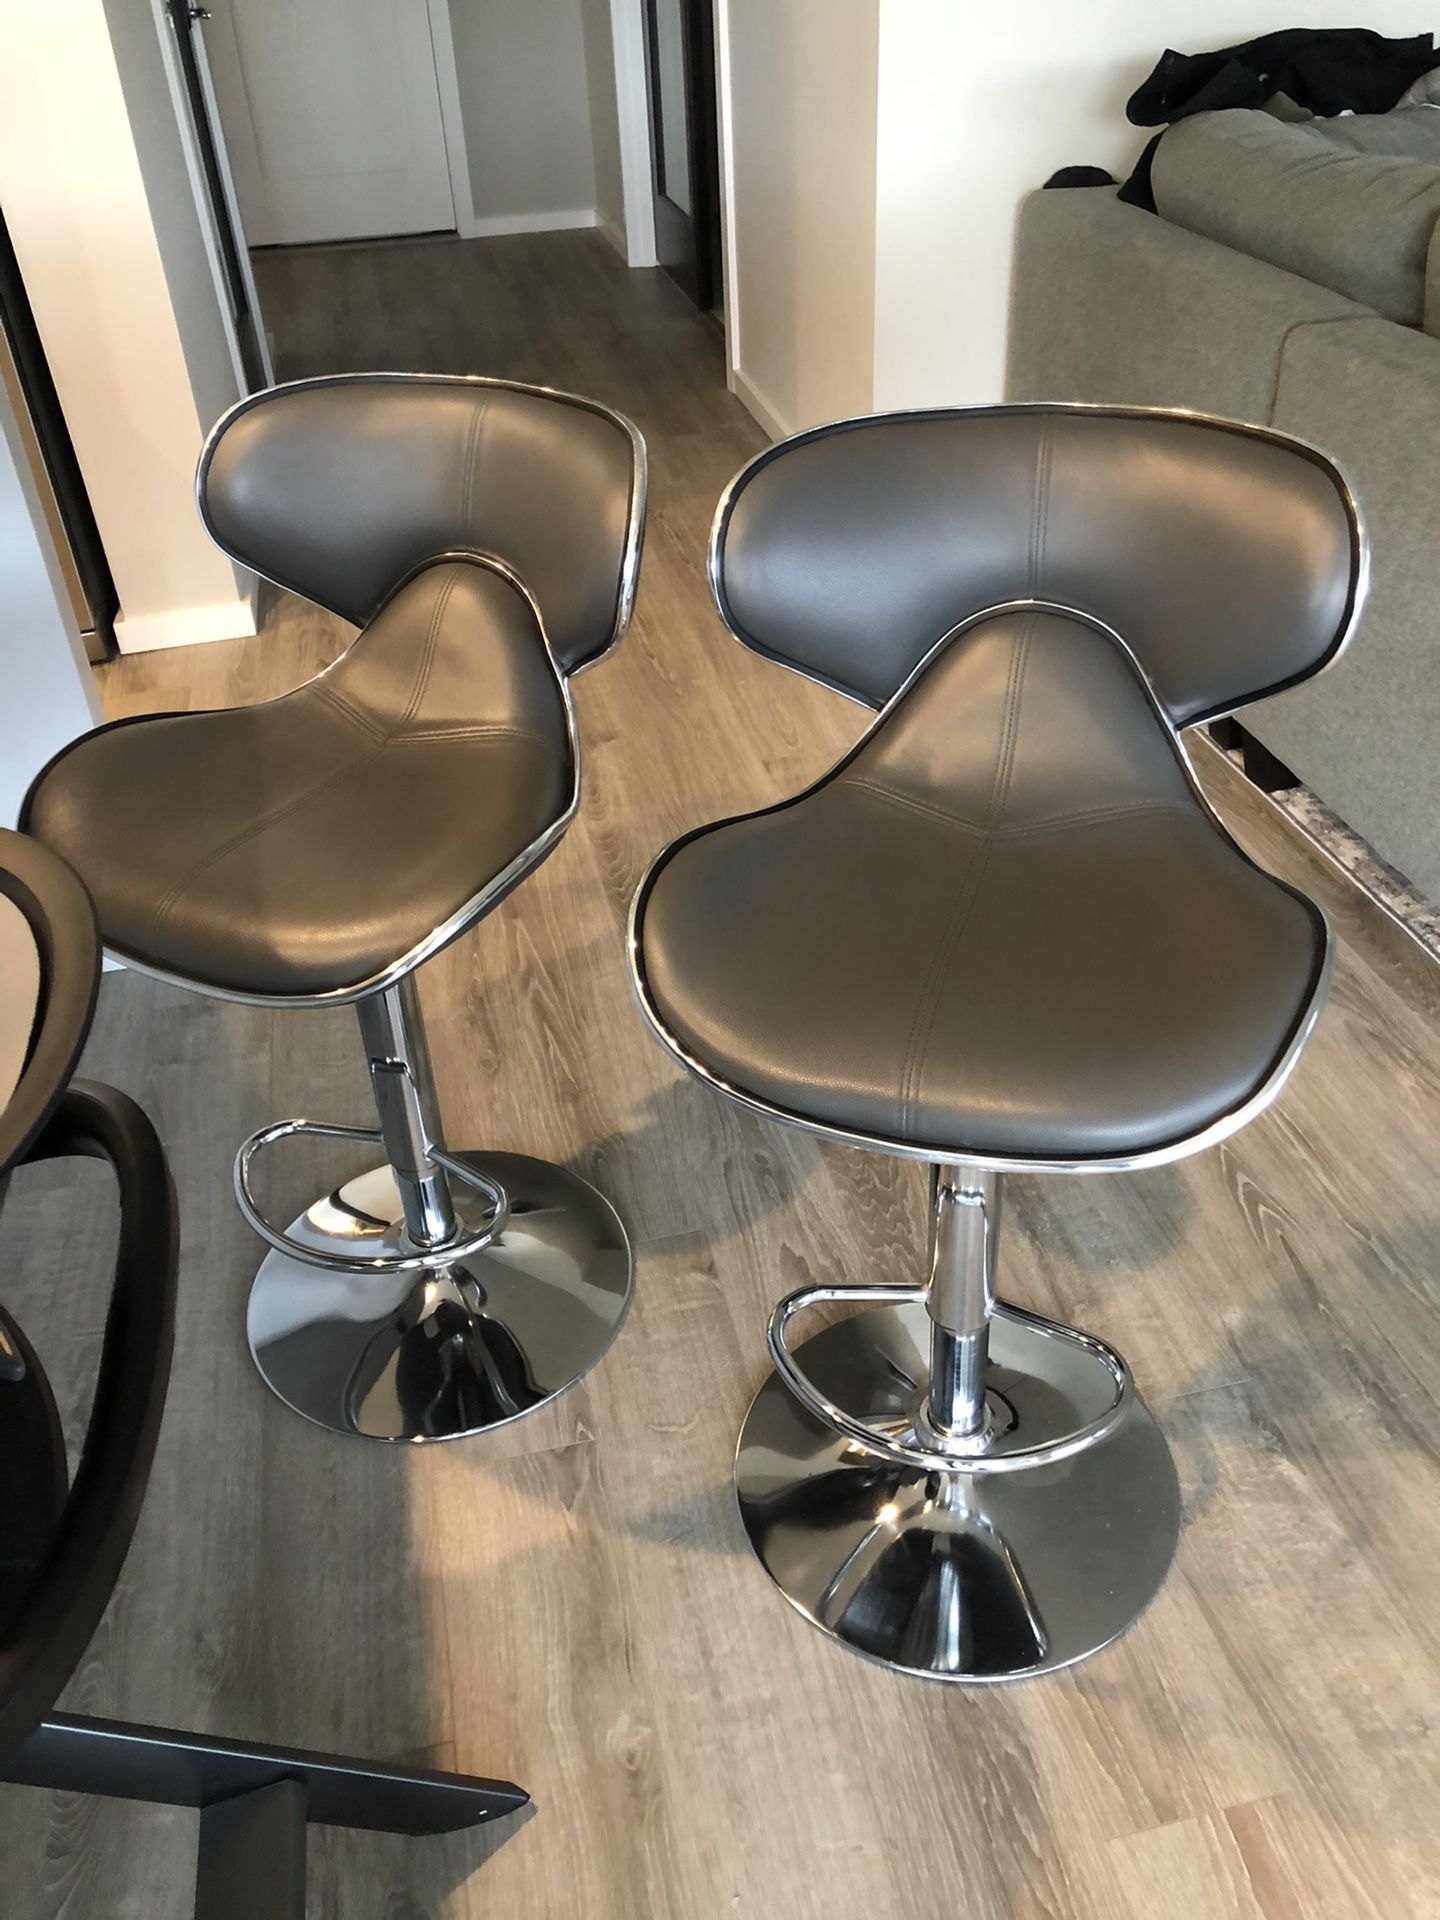 Bar stools (used for 1 year)